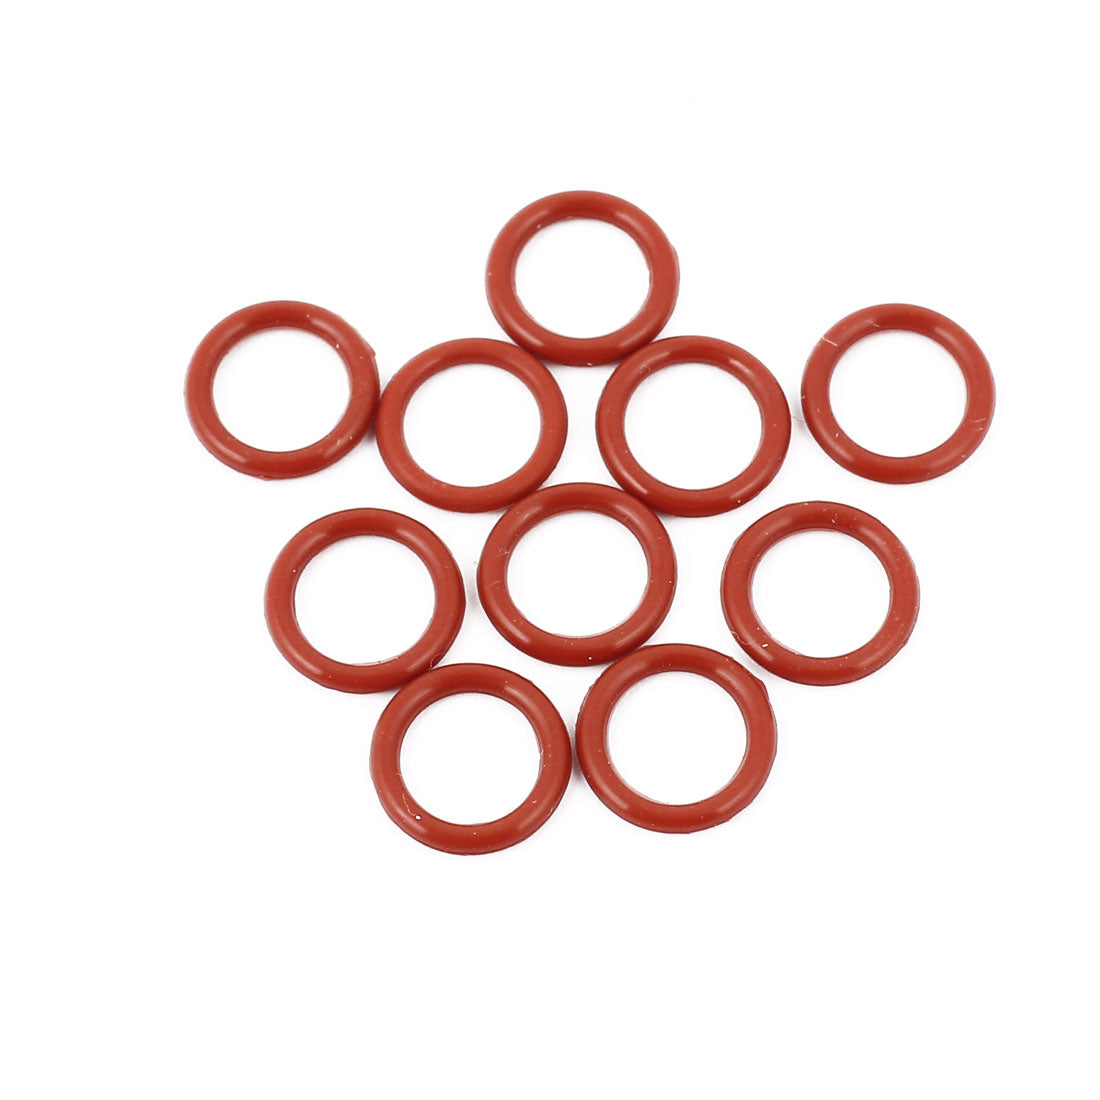 uxcell Uxcell 10Pcs Red 10mm x 1.5mm Silicone Rubber Gasket O Ring Sealing Ring Heat Resistant